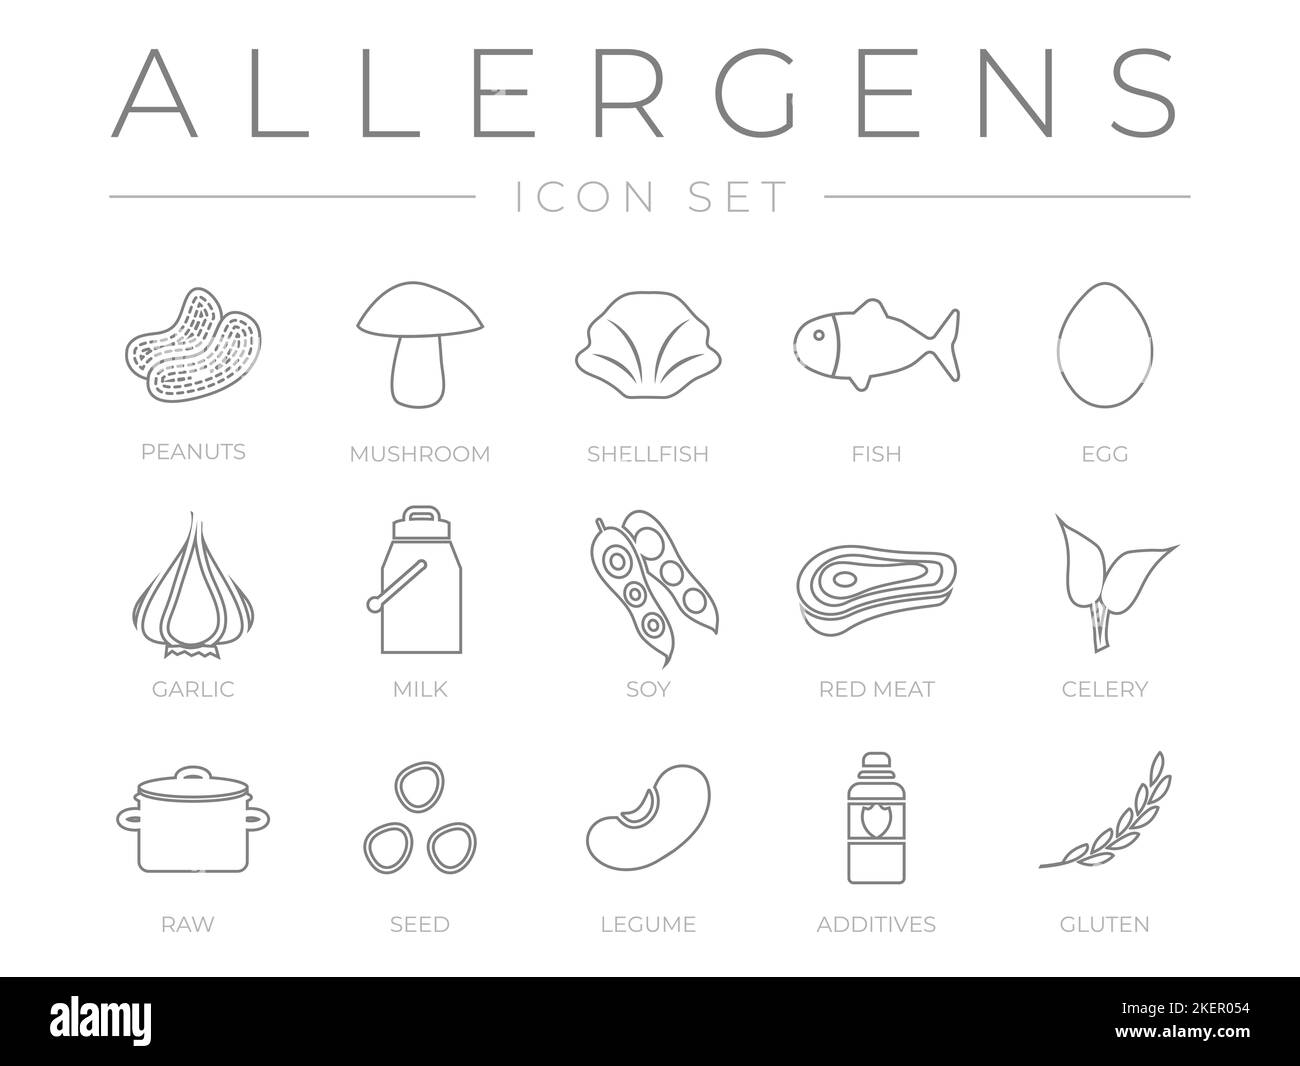 Allergens Outline Icon Set. Peanuts, Mushroom, Shellfish, Fish, Egg, Garlic, Milk, Soy Meat, Celery, Raw Food, Seed, Legume and Additives Gluten Aller Stock Vector